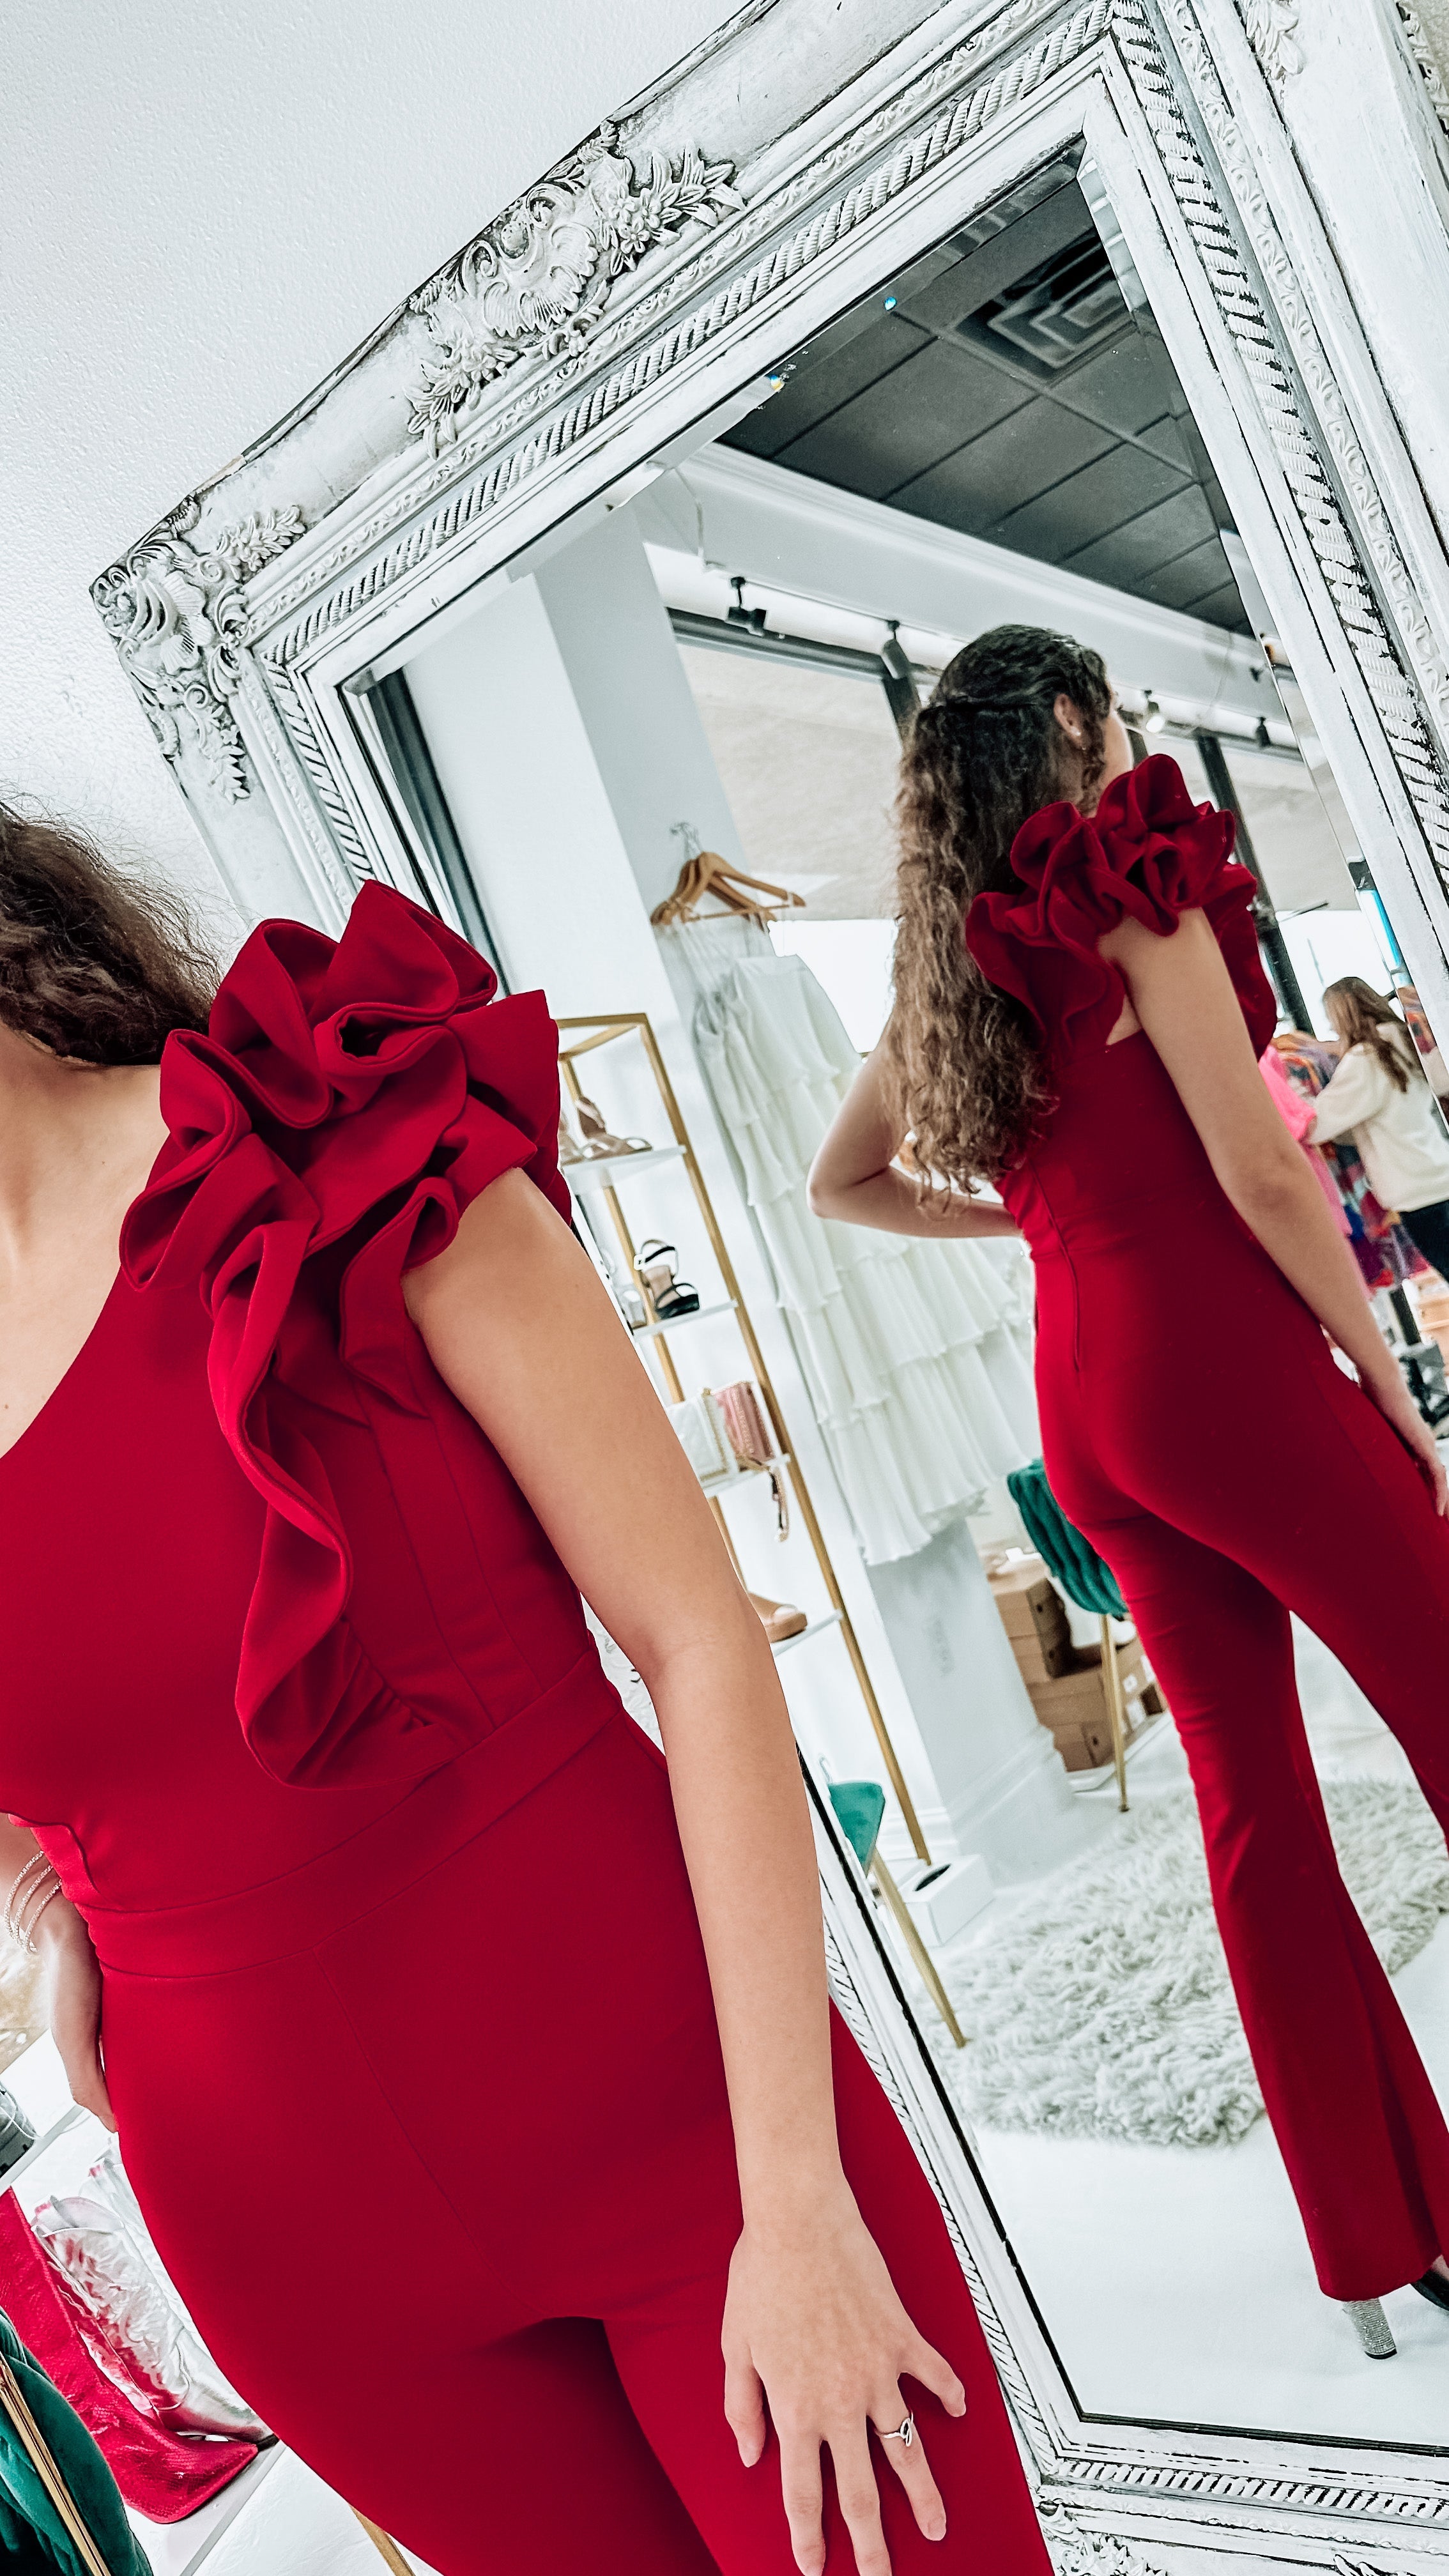 Lucette Red Ruffled One Shoulder Jumpsuit